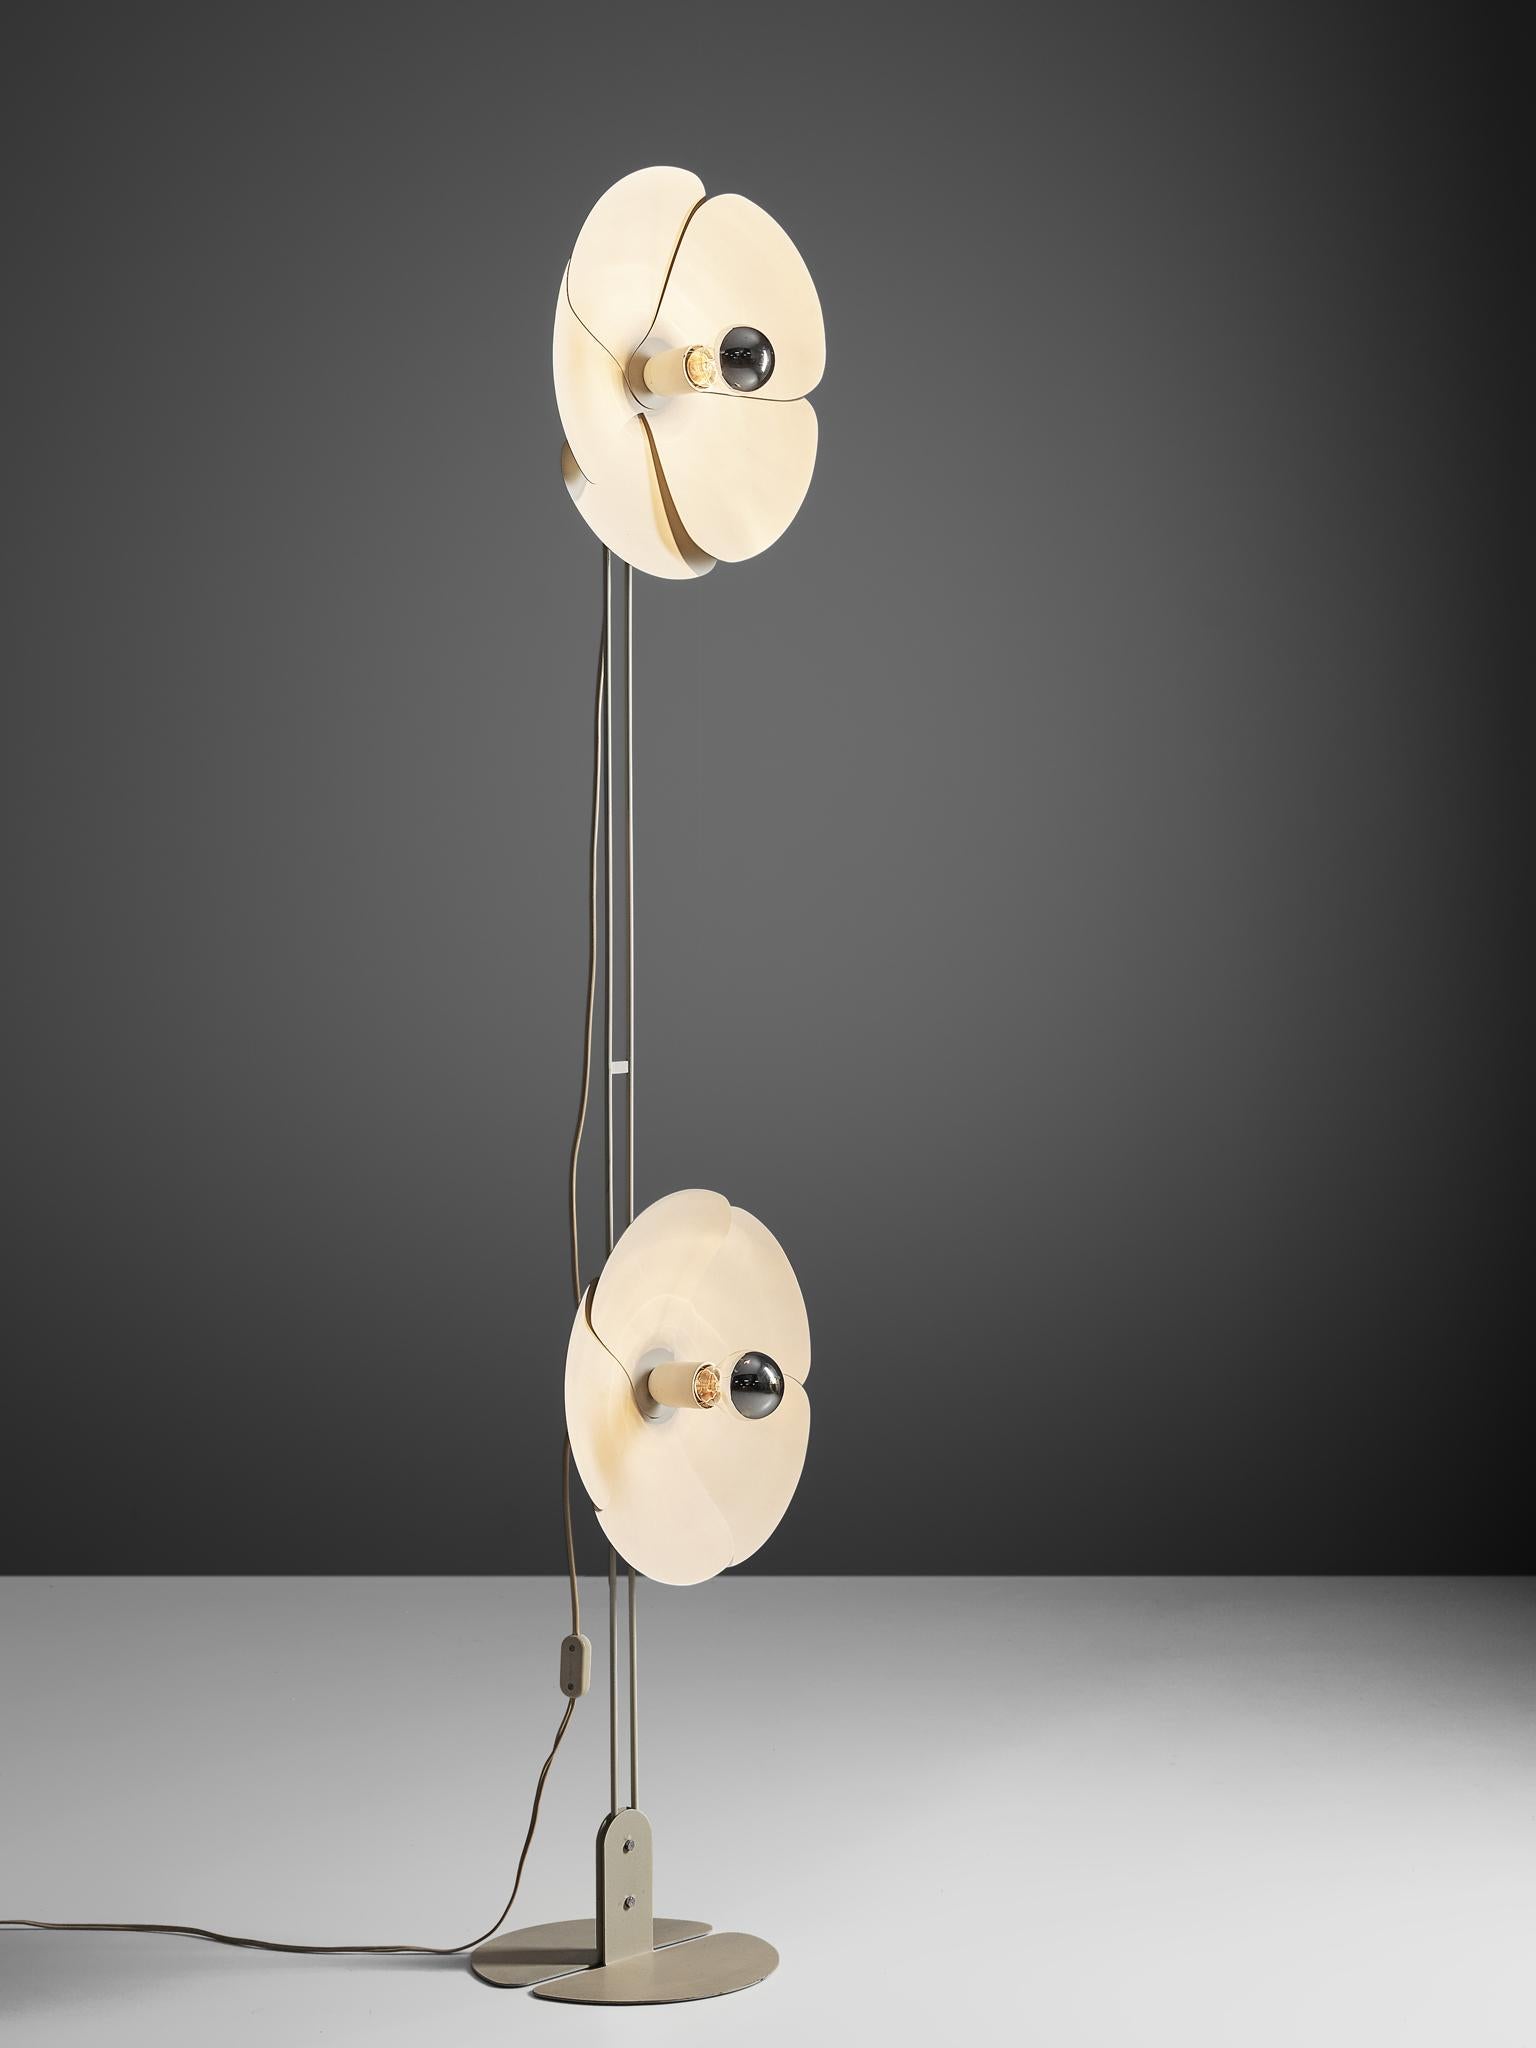 Olivier Mourgue for Desderot, 2093 floor lamp, chromed metal and aluminum, France, 1967.

A floor lamp that features a stem with two flower shaped shades. The shades consist of five brushed aluminum leafs that reflect the light in an unparalleled